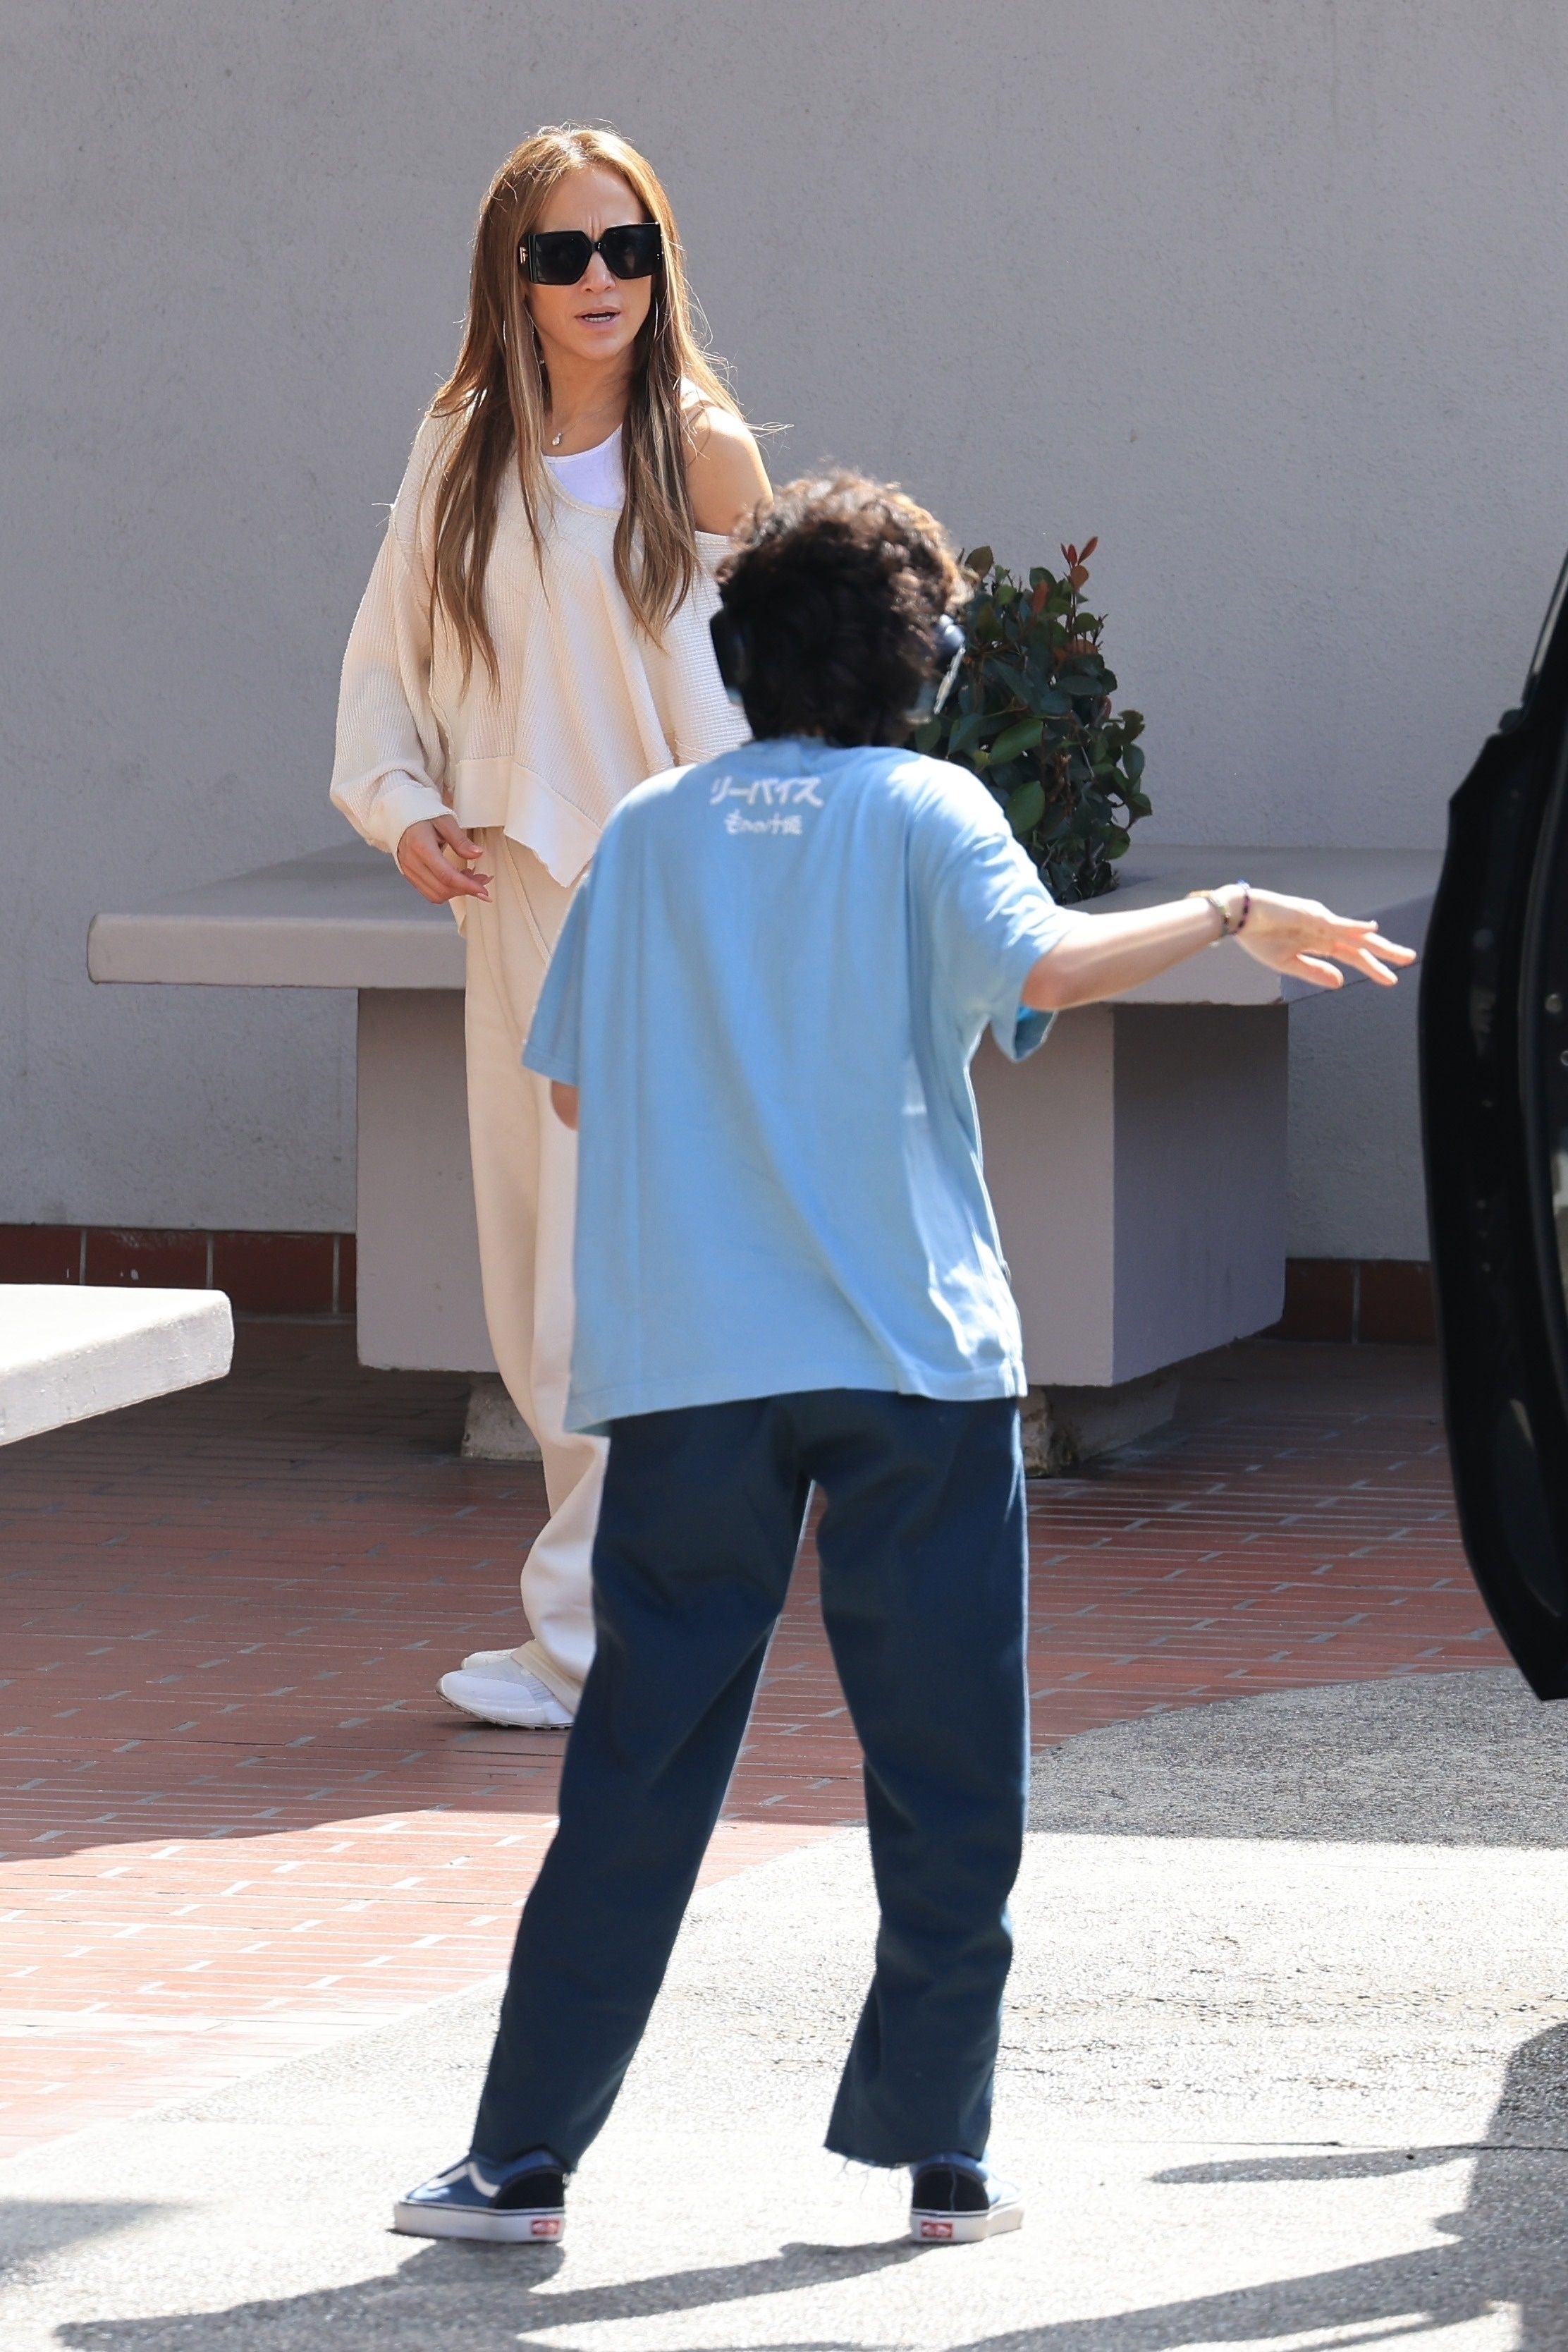 The singer was seen speaking to Emme as the two went around town in casual outfits